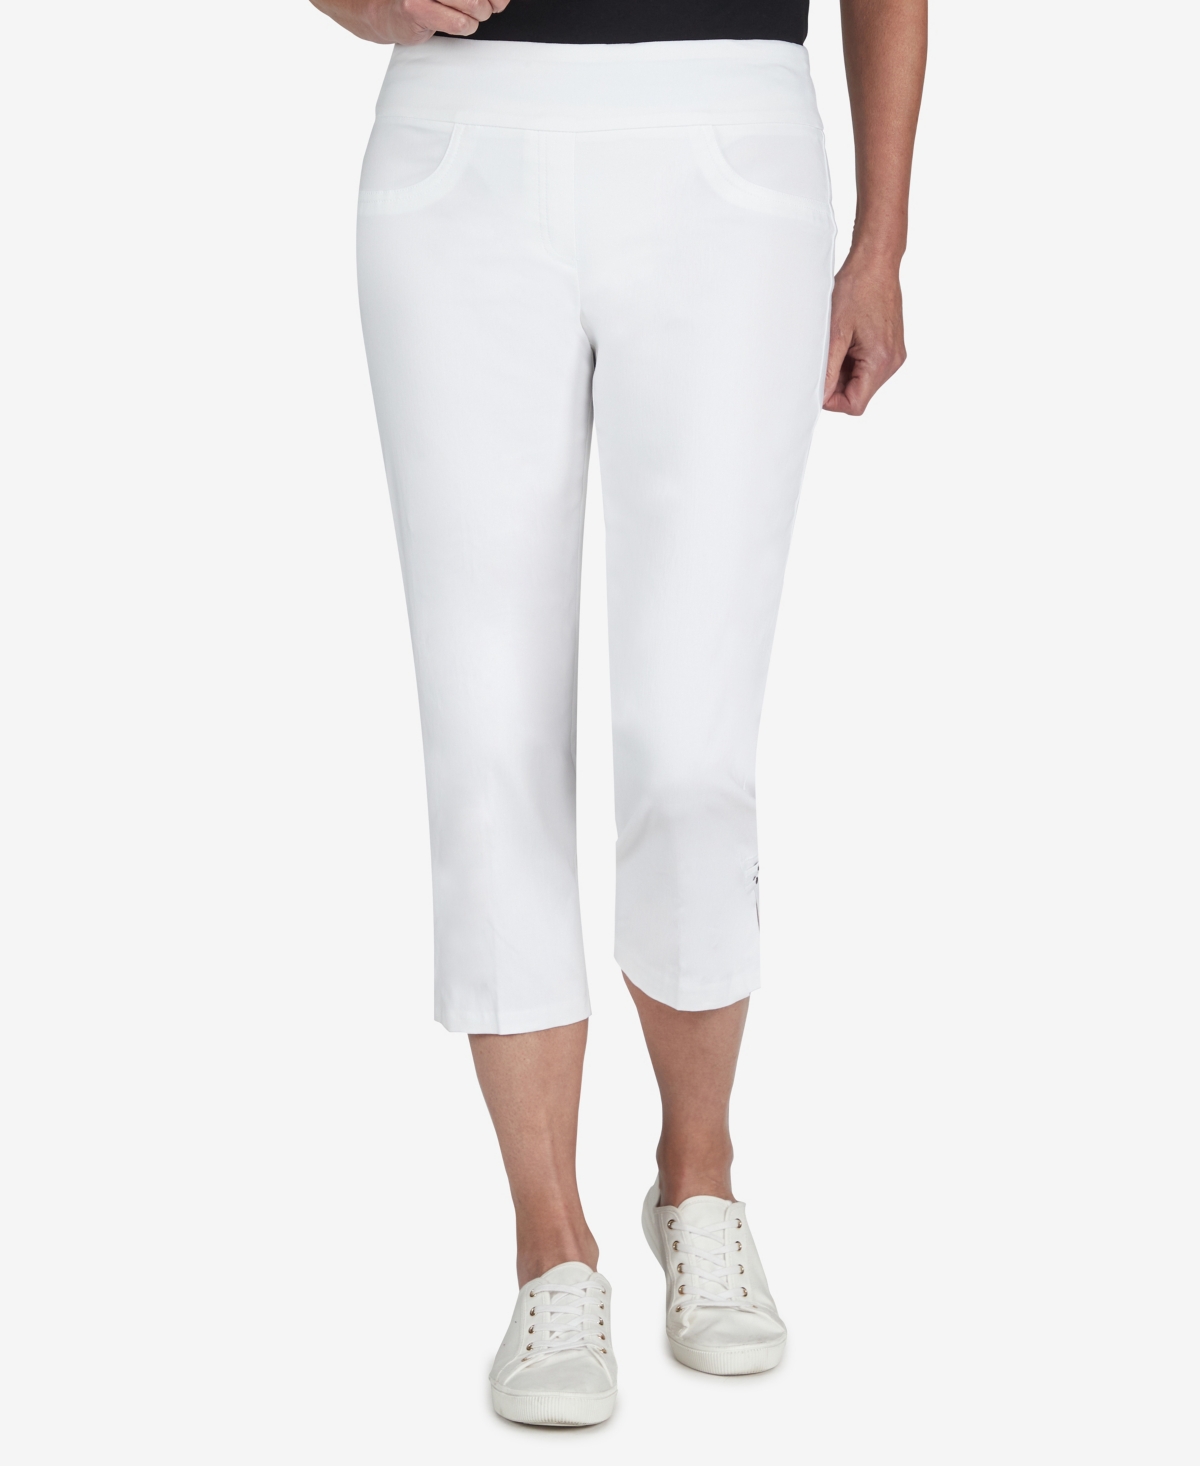 Hearts Of Palm Plus Size Essentials Solid Pull-On Capri Pants with Detailed Split Hem